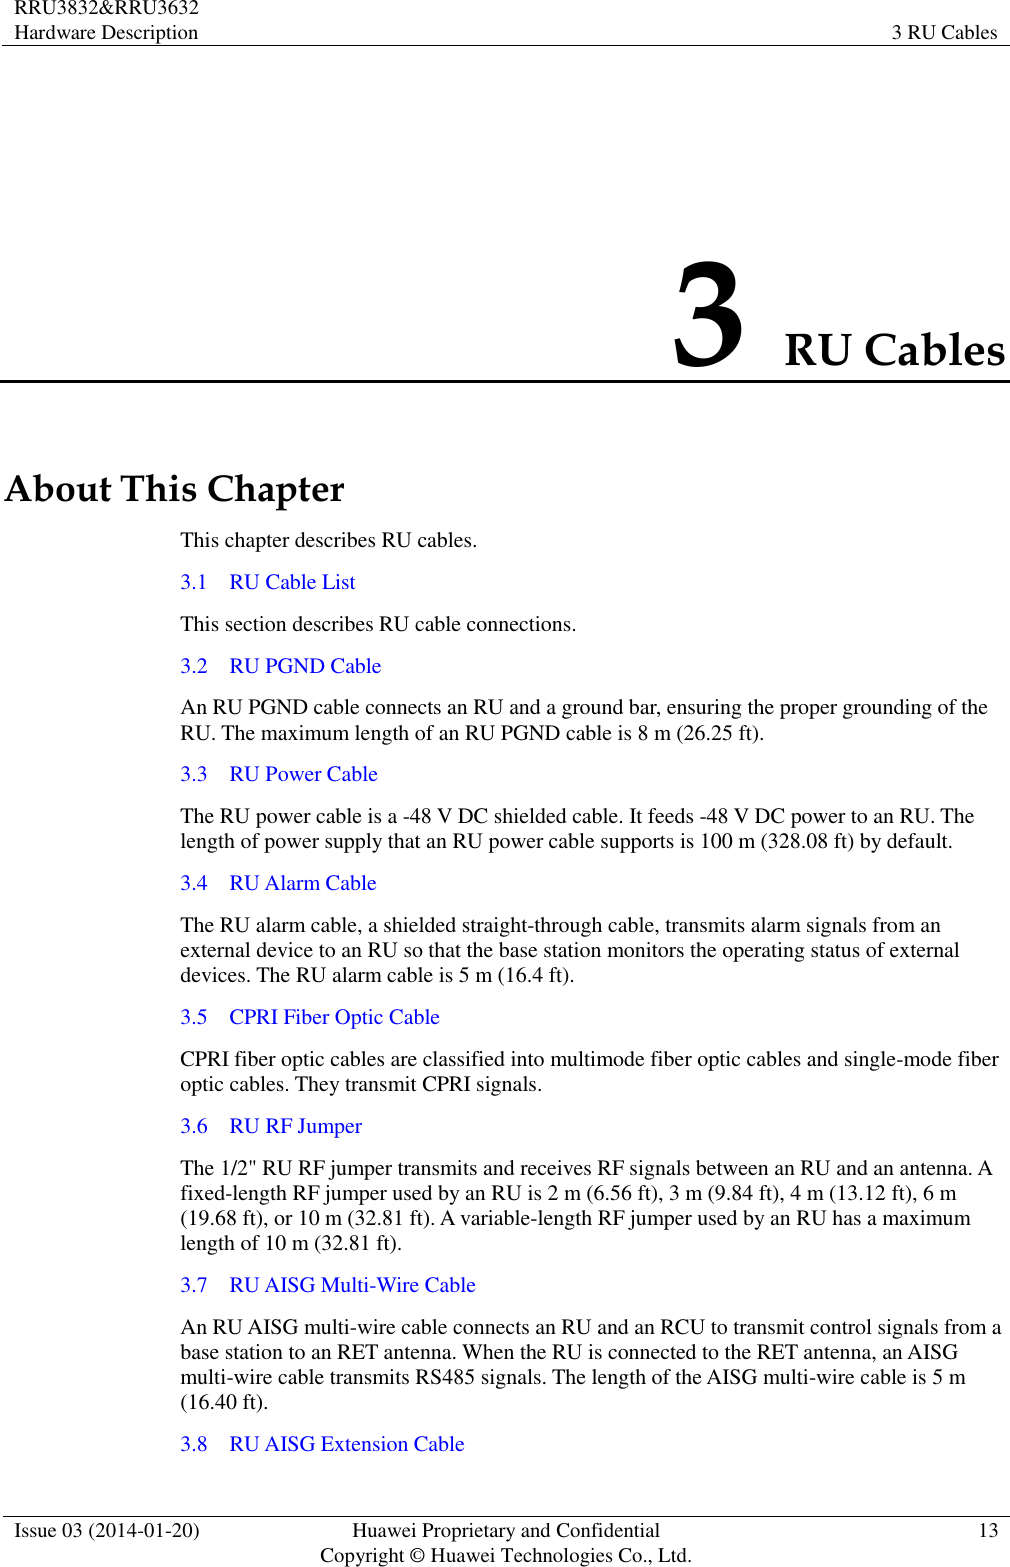 RRU3832&amp;RRU3632 Hardware Description 3 RU Cables  Issue 03 (2014-01-20) Huawei Proprietary and Confidential                                     Copyright © Huawei Technologies Co., Ltd. 13  3 RU Cables About This Chapter This chapter describes RU cables. 3.1    RU Cable List This section describes RU cable connections. 3.2    RU PGND Cable An RU PGND cable connects an RU and a ground bar, ensuring the proper grounding of the RU. The maximum length of an RU PGND cable is 8 m (26.25 ft). 3.3    RU Power Cable The RU power cable is a -48 V DC shielded cable. It feeds -48 V DC power to an RU. The length of power supply that an RU power cable supports is 100 m (328.08 ft) by default. 3.4    RU Alarm Cable The RU alarm cable, a shielded straight-through cable, transmits alarm signals from an external device to an RU so that the base station monitors the operating status of external devices. The RU alarm cable is 5 m (16.4 ft). 3.5    CPRI Fiber Optic Cable CPRI fiber optic cables are classified into multimode fiber optic cables and single-mode fiber optic cables. They transmit CPRI signals. 3.6    RU RF Jumper The 1/2&quot; RU RF jumper transmits and receives RF signals between an RU and an antenna. A fixed-length RF jumper used by an RU is 2 m (6.56 ft), 3 m (9.84 ft), 4 m (13.12 ft), 6 m (19.68 ft), or 10 m (32.81 ft). A variable-length RF jumper used by an RU has a maximum length of 10 m (32.81 ft). 3.7    RU AISG Multi-Wire Cable An RU AISG multi-wire cable connects an RU and an RCU to transmit control signals from a base station to an RET antenna. When the RU is connected to the RET antenna, an AISG multi-wire cable transmits RS485 signals. The length of the AISG multi-wire cable is 5 m (16.40 ft). 3.8    RU AISG Extension Cable 